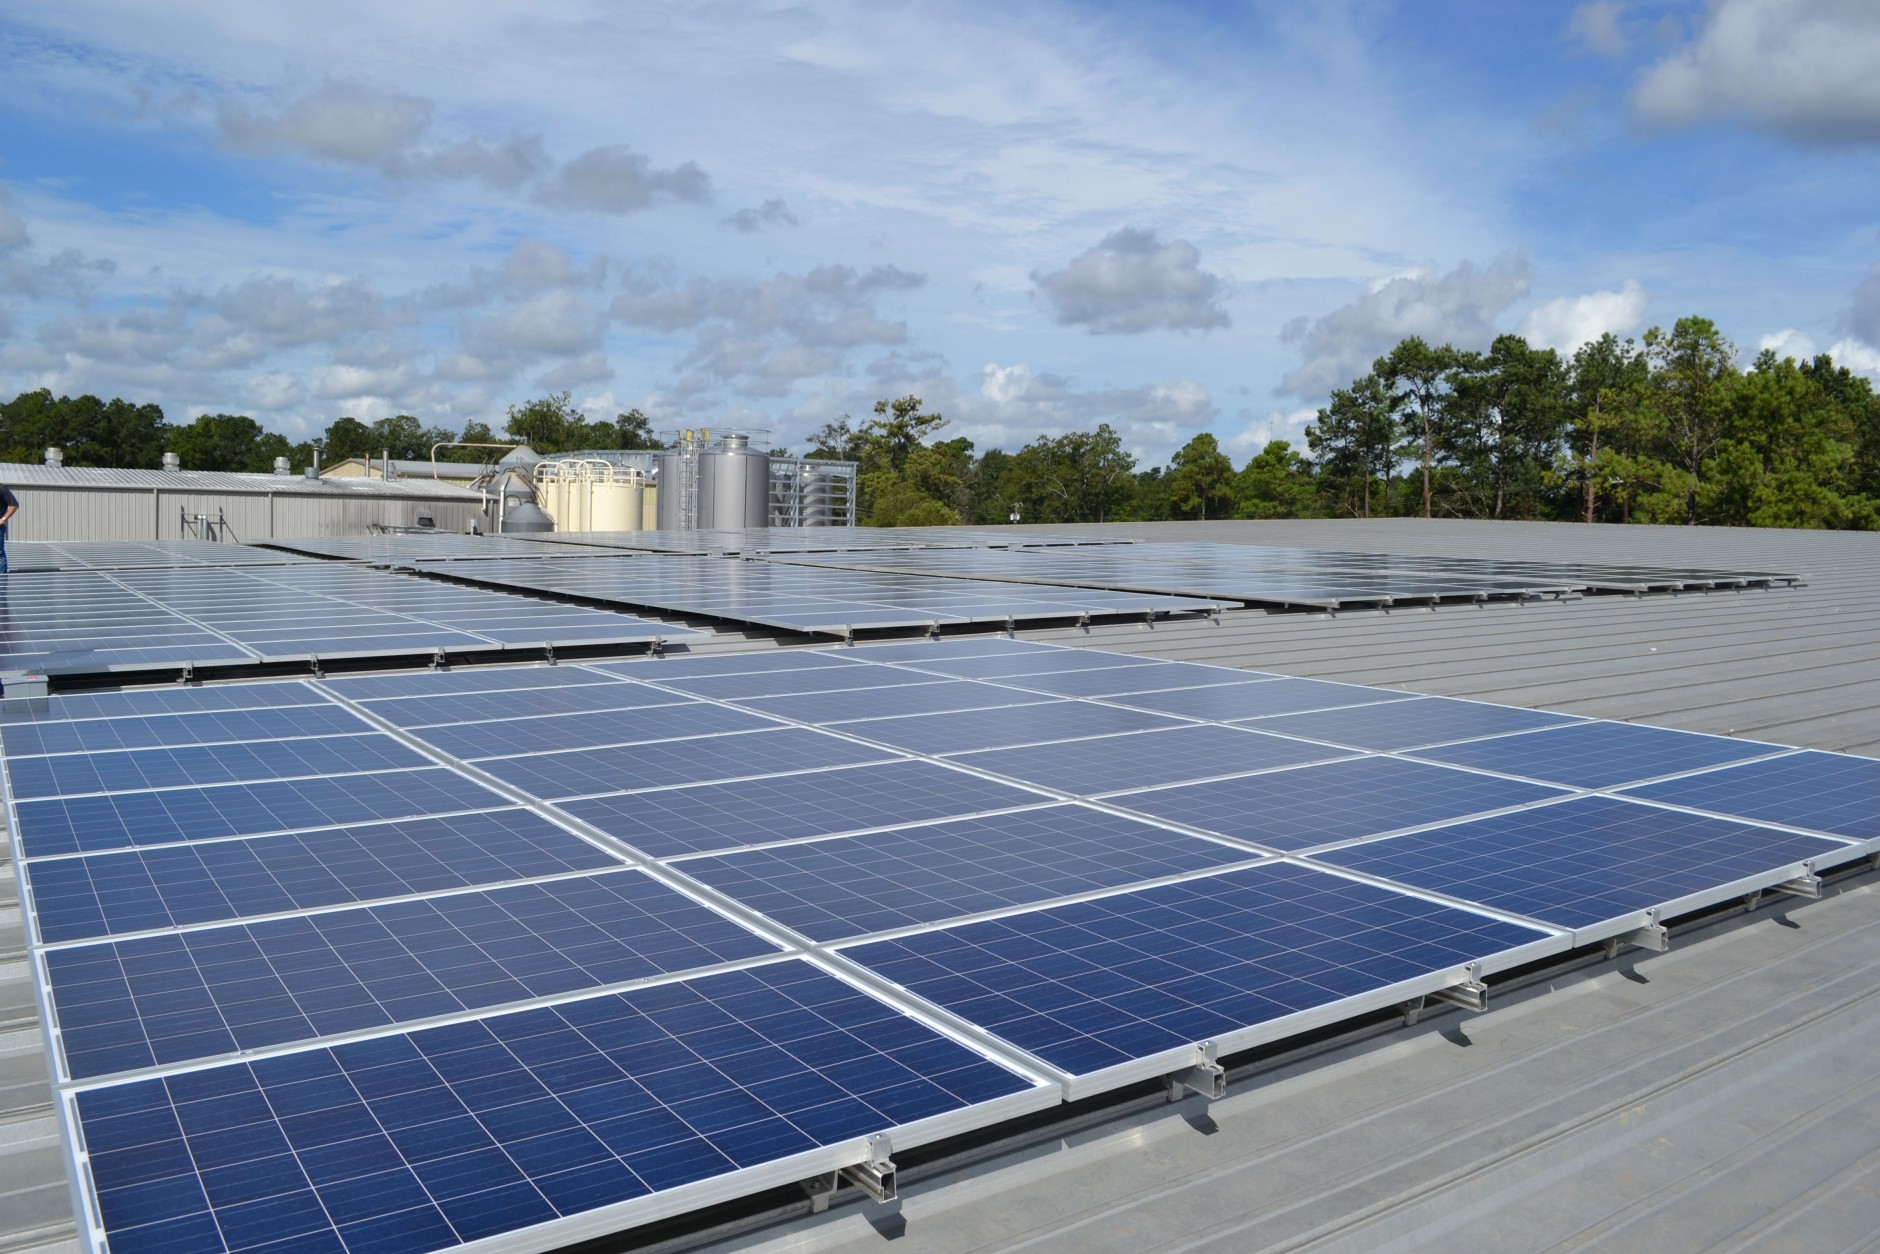 This photo released by Abita Brewing Co. shows  their recently unveiled 340-panel 84 kilowatt photovoltaic rooftop solar system that it will use to power its brew house, Friday, Sept. 20, 2013. (AP Photo/Abita Brewing Co.)